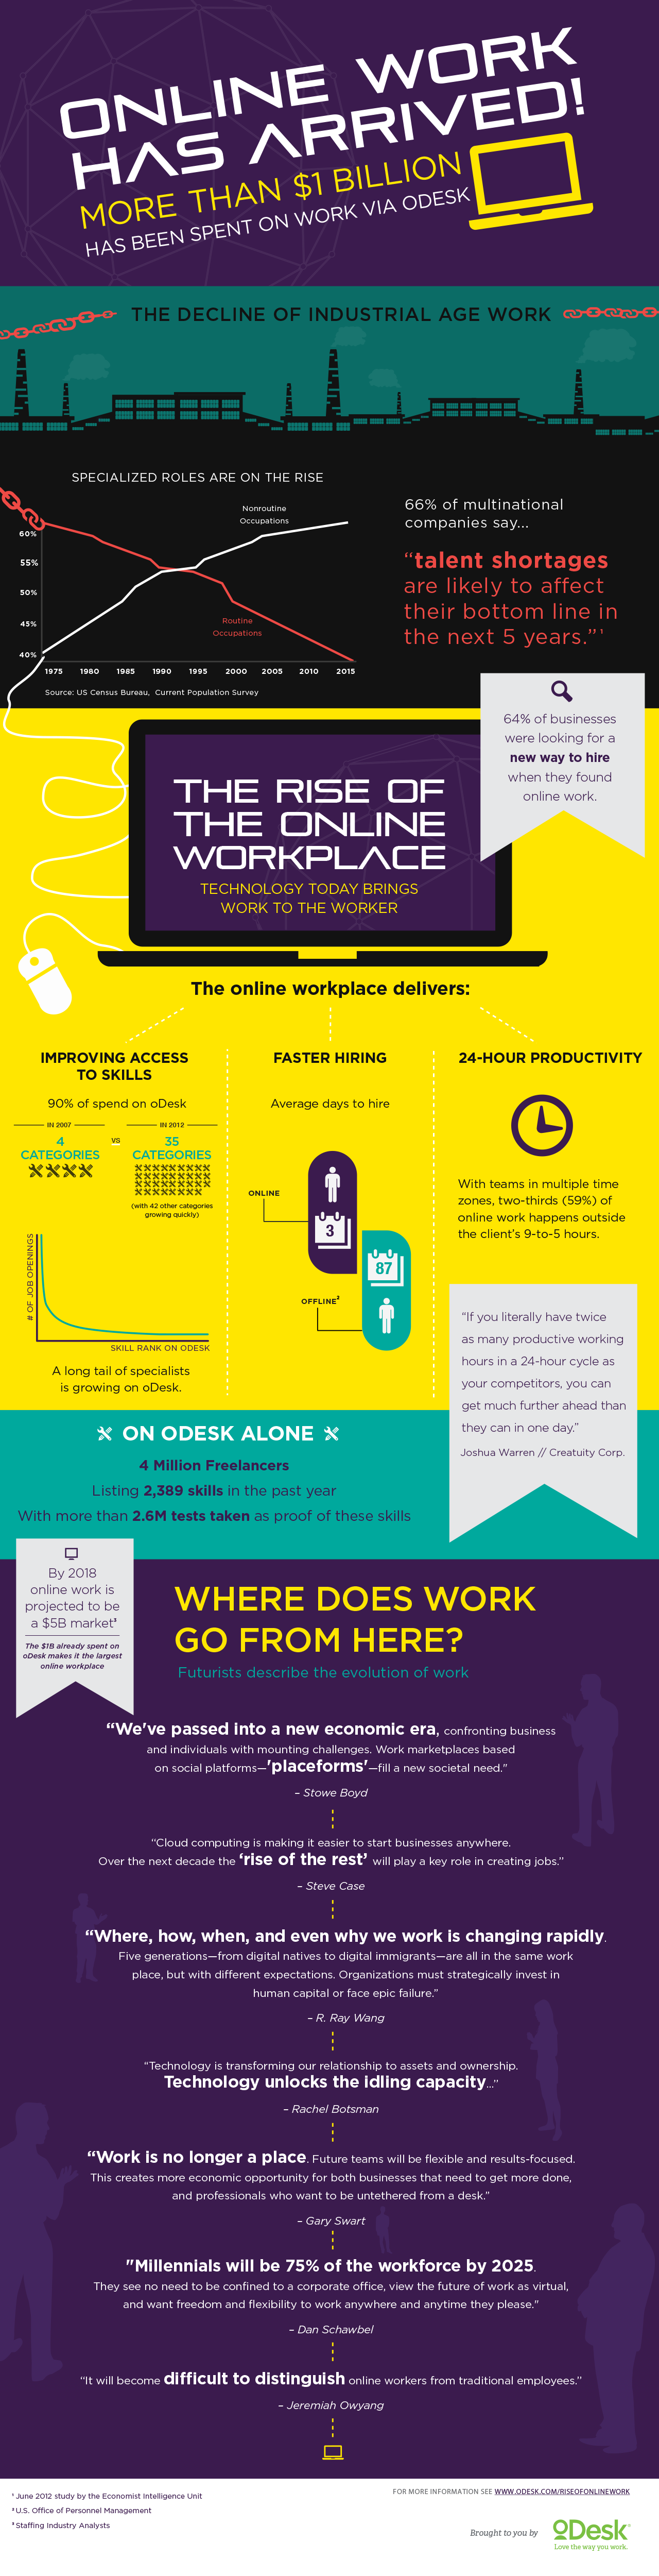 The Rise of Online Work